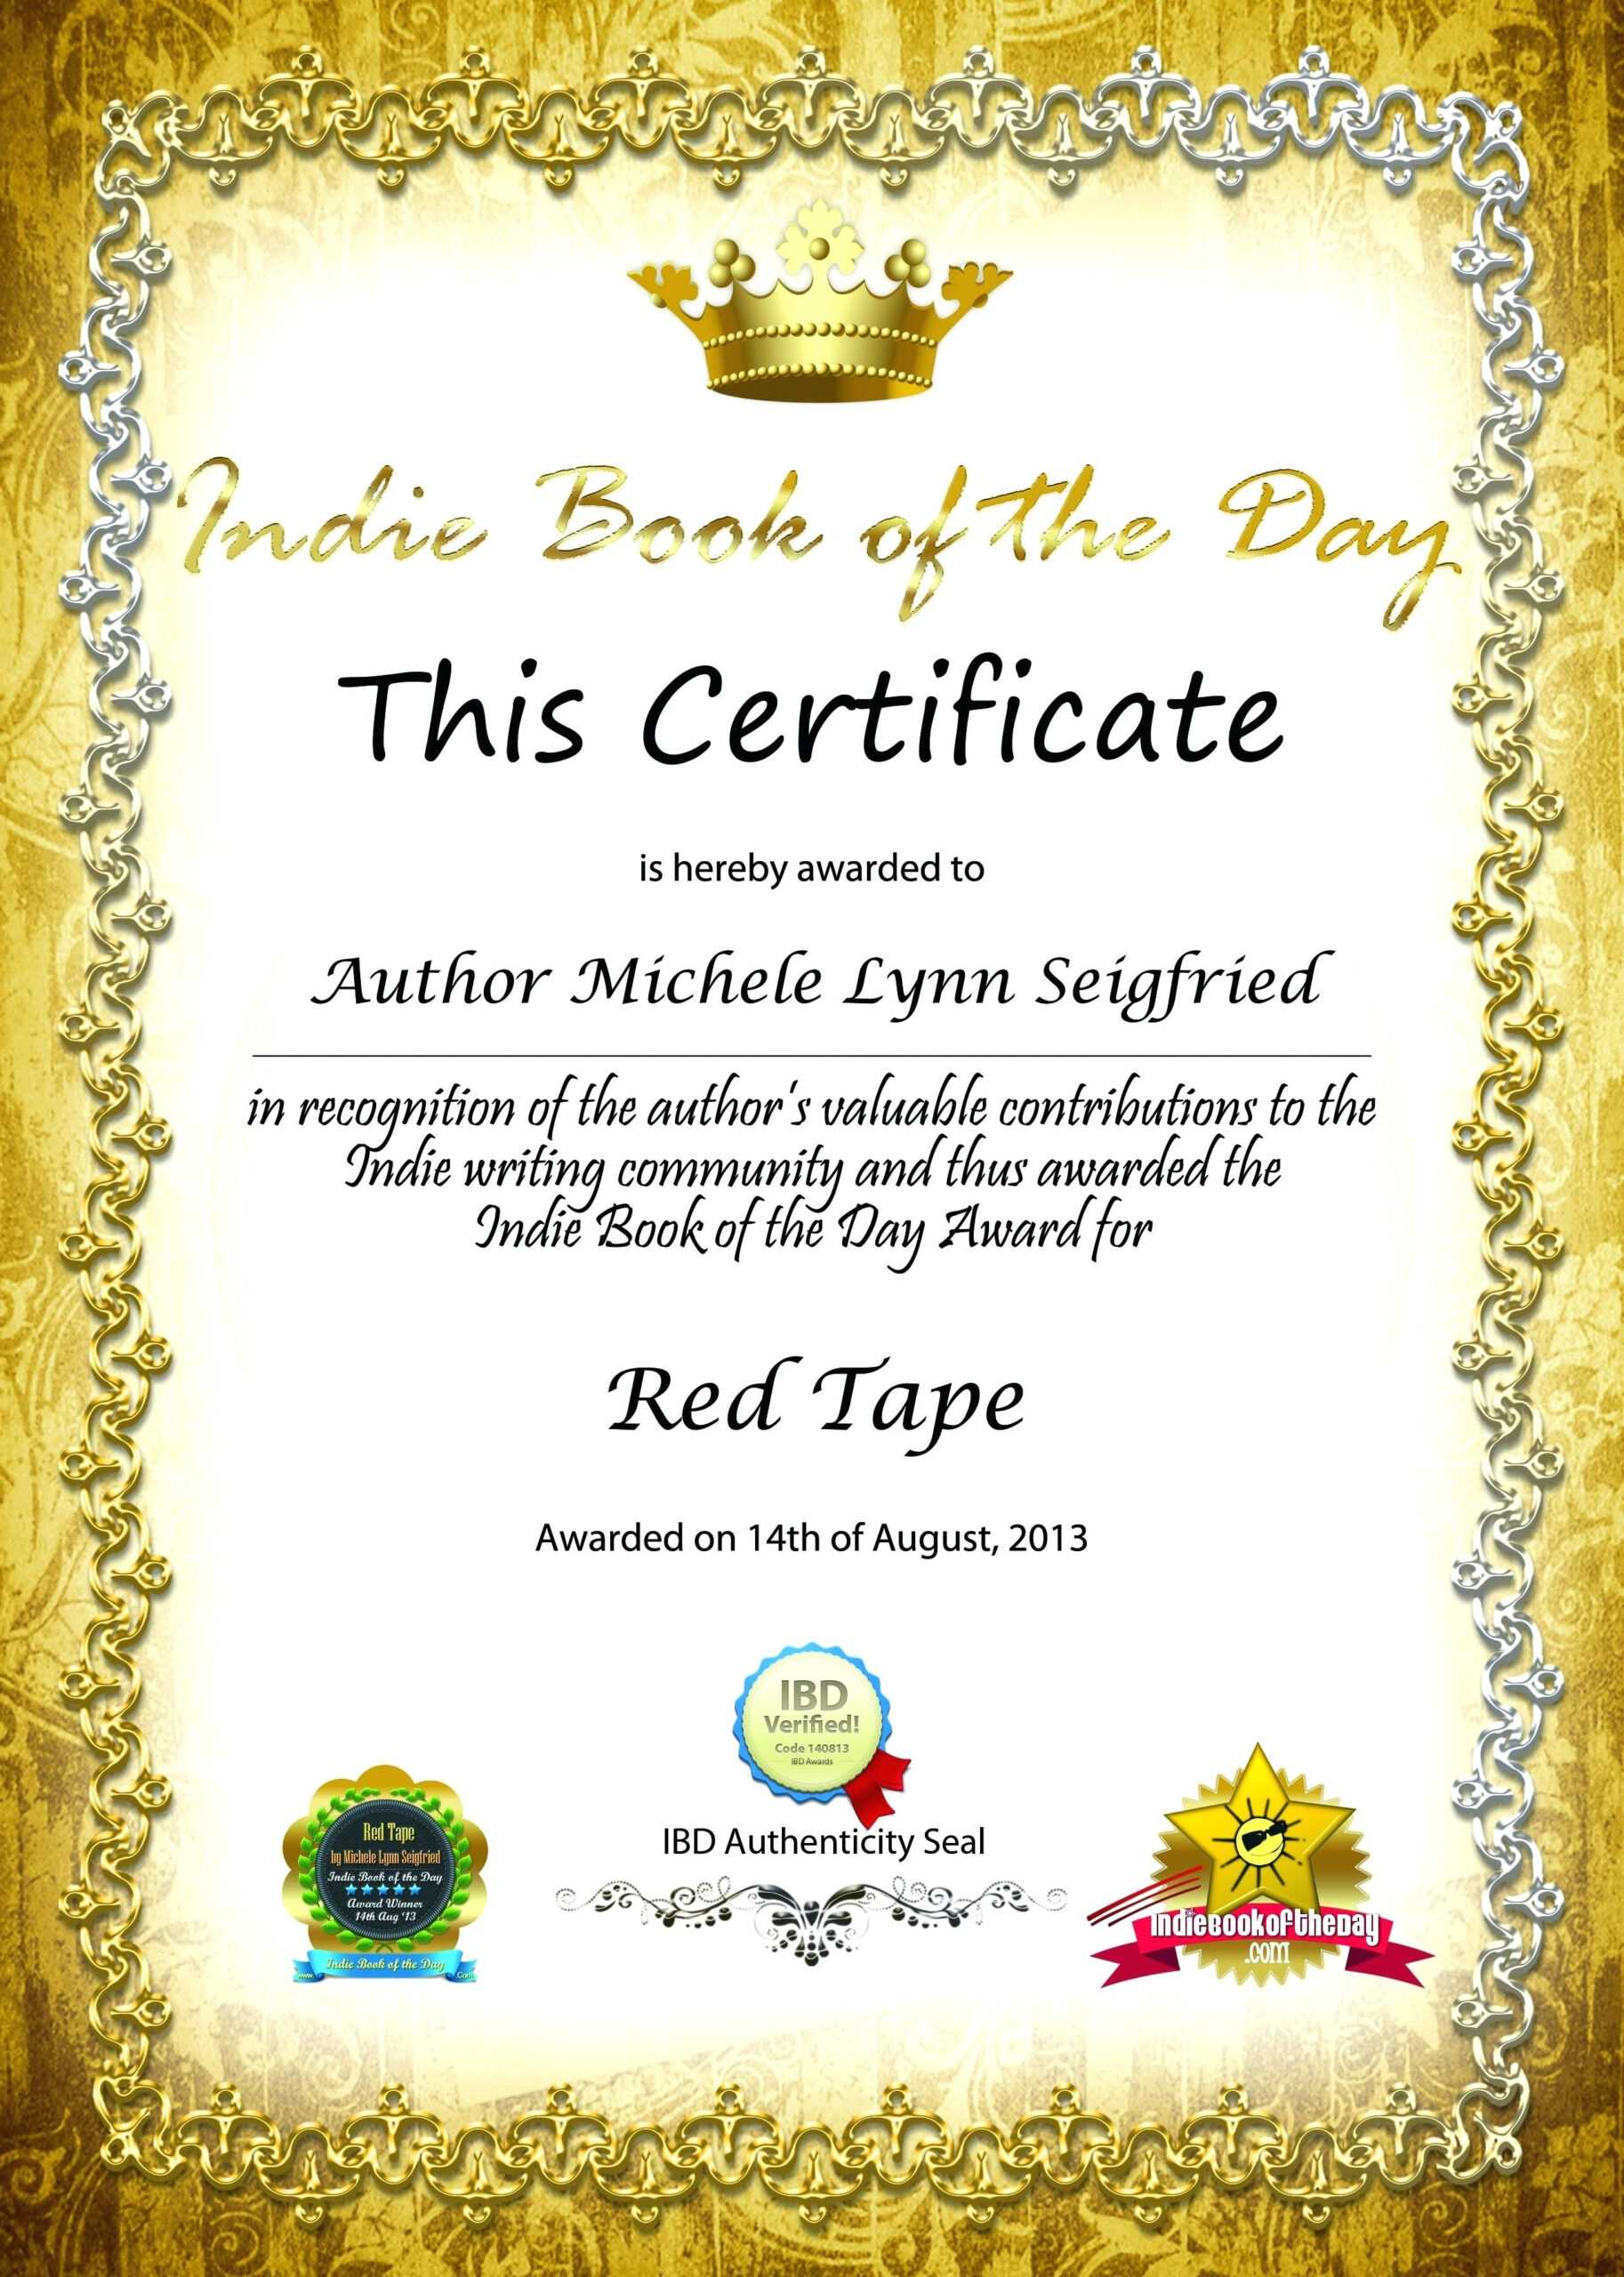 Collection Of Solutions For Spelling Bee Award Certificate Intended For Spelling Bee Award Certificate Template